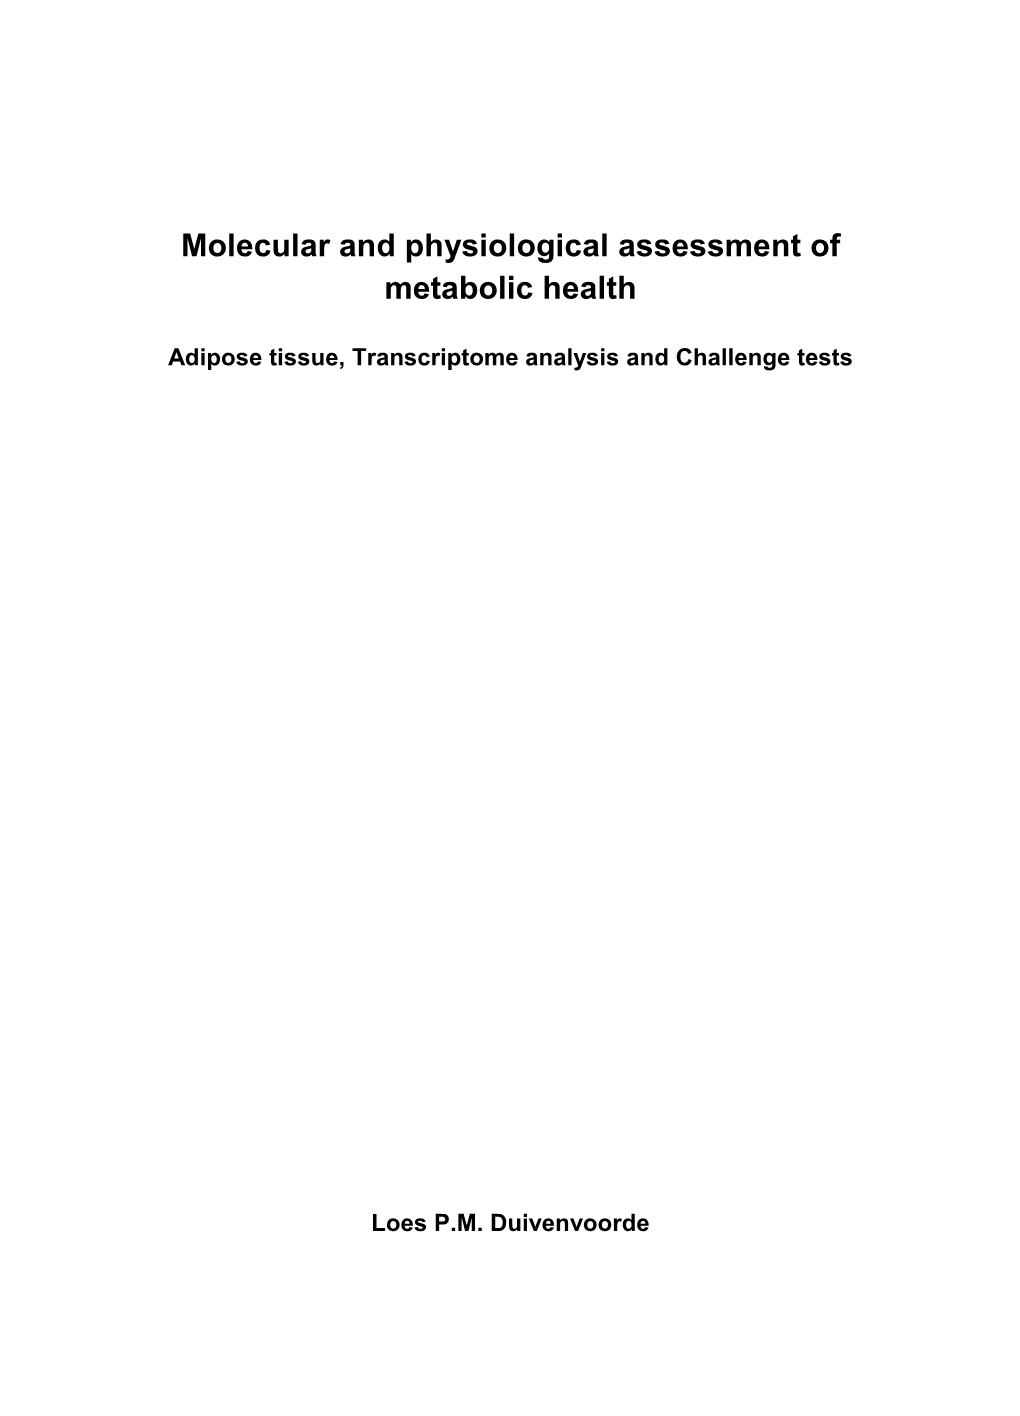 Molecular and Physiological Assessment of Metabolic Health